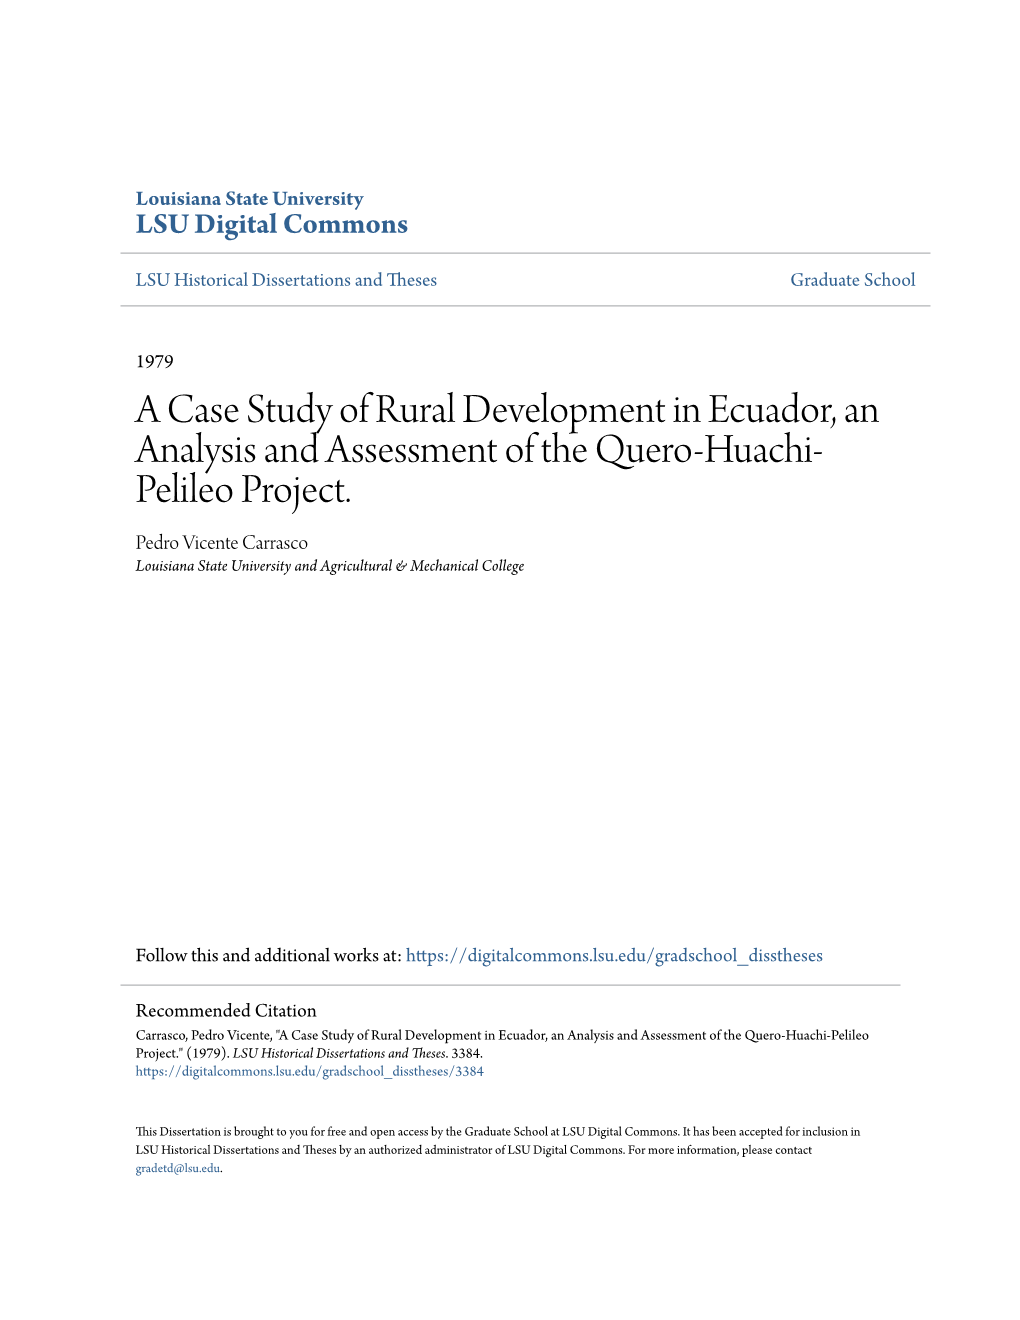 A Case Study of Rural Development in Ecuador, an Analysis and Assessment of the Quero-Huachi- Pelileo Project